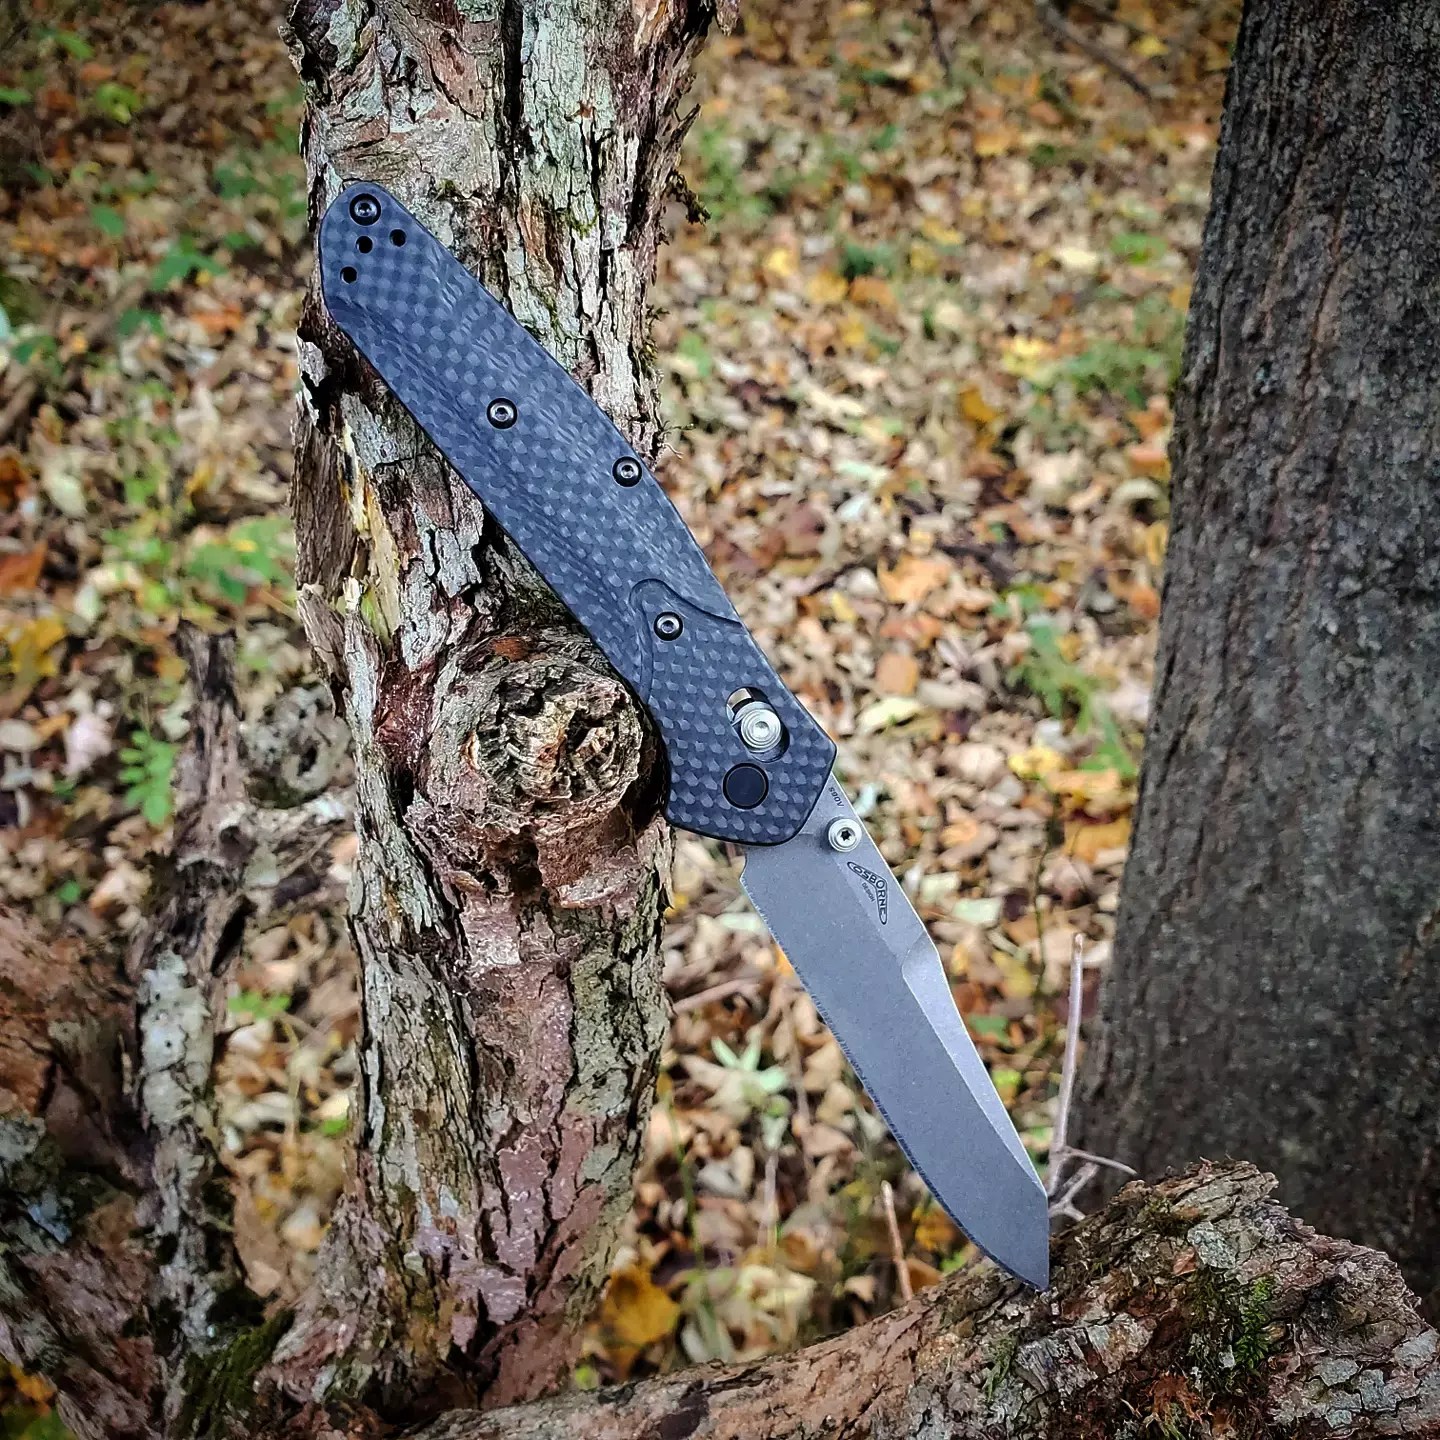 The Benchmade 940 knife